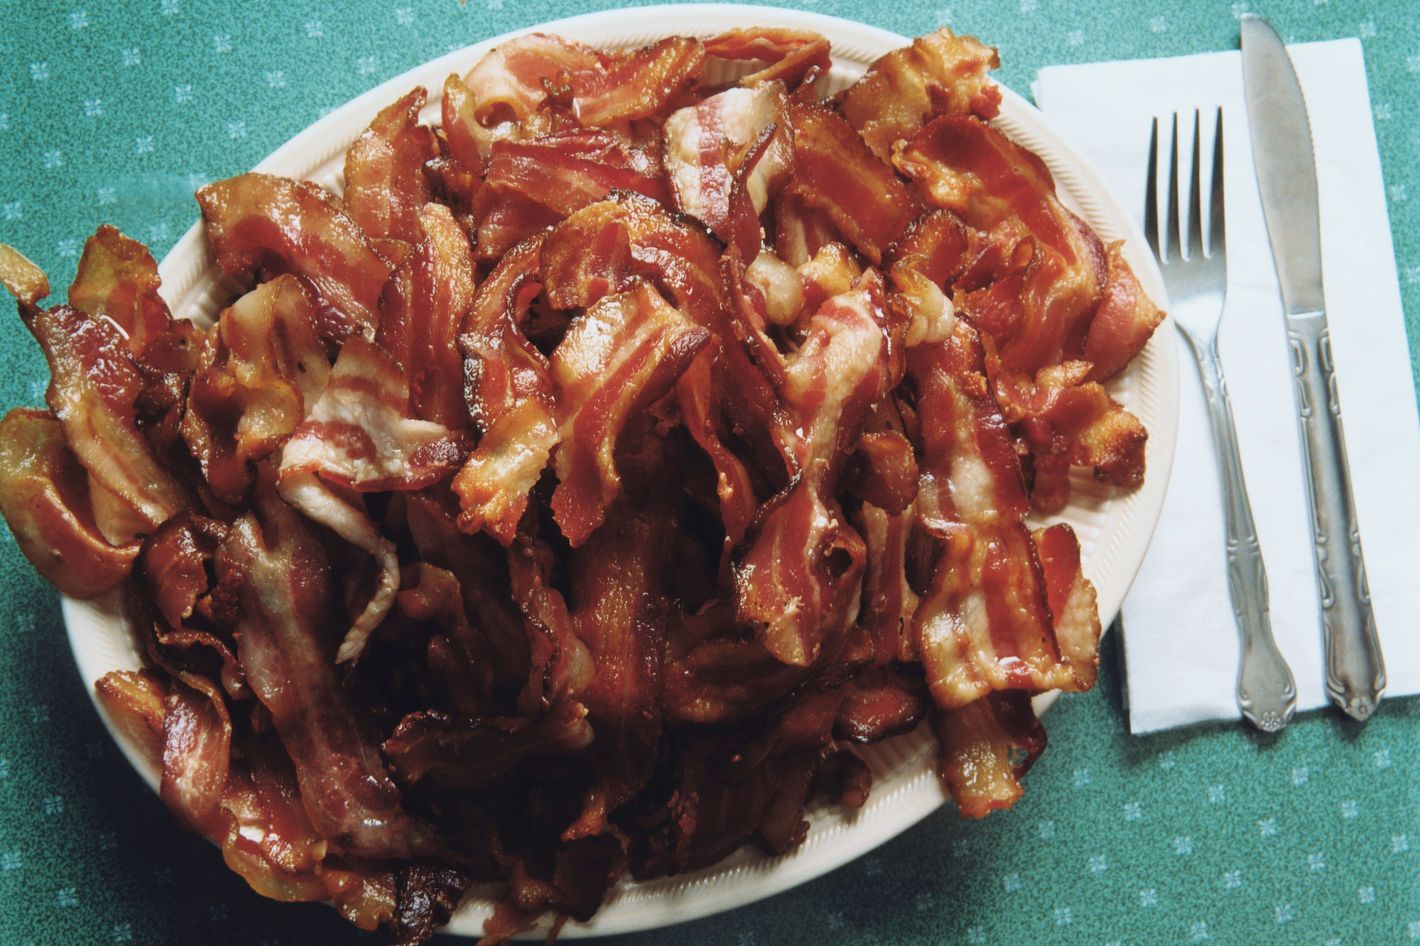 How Much Bacon Can I Eat?